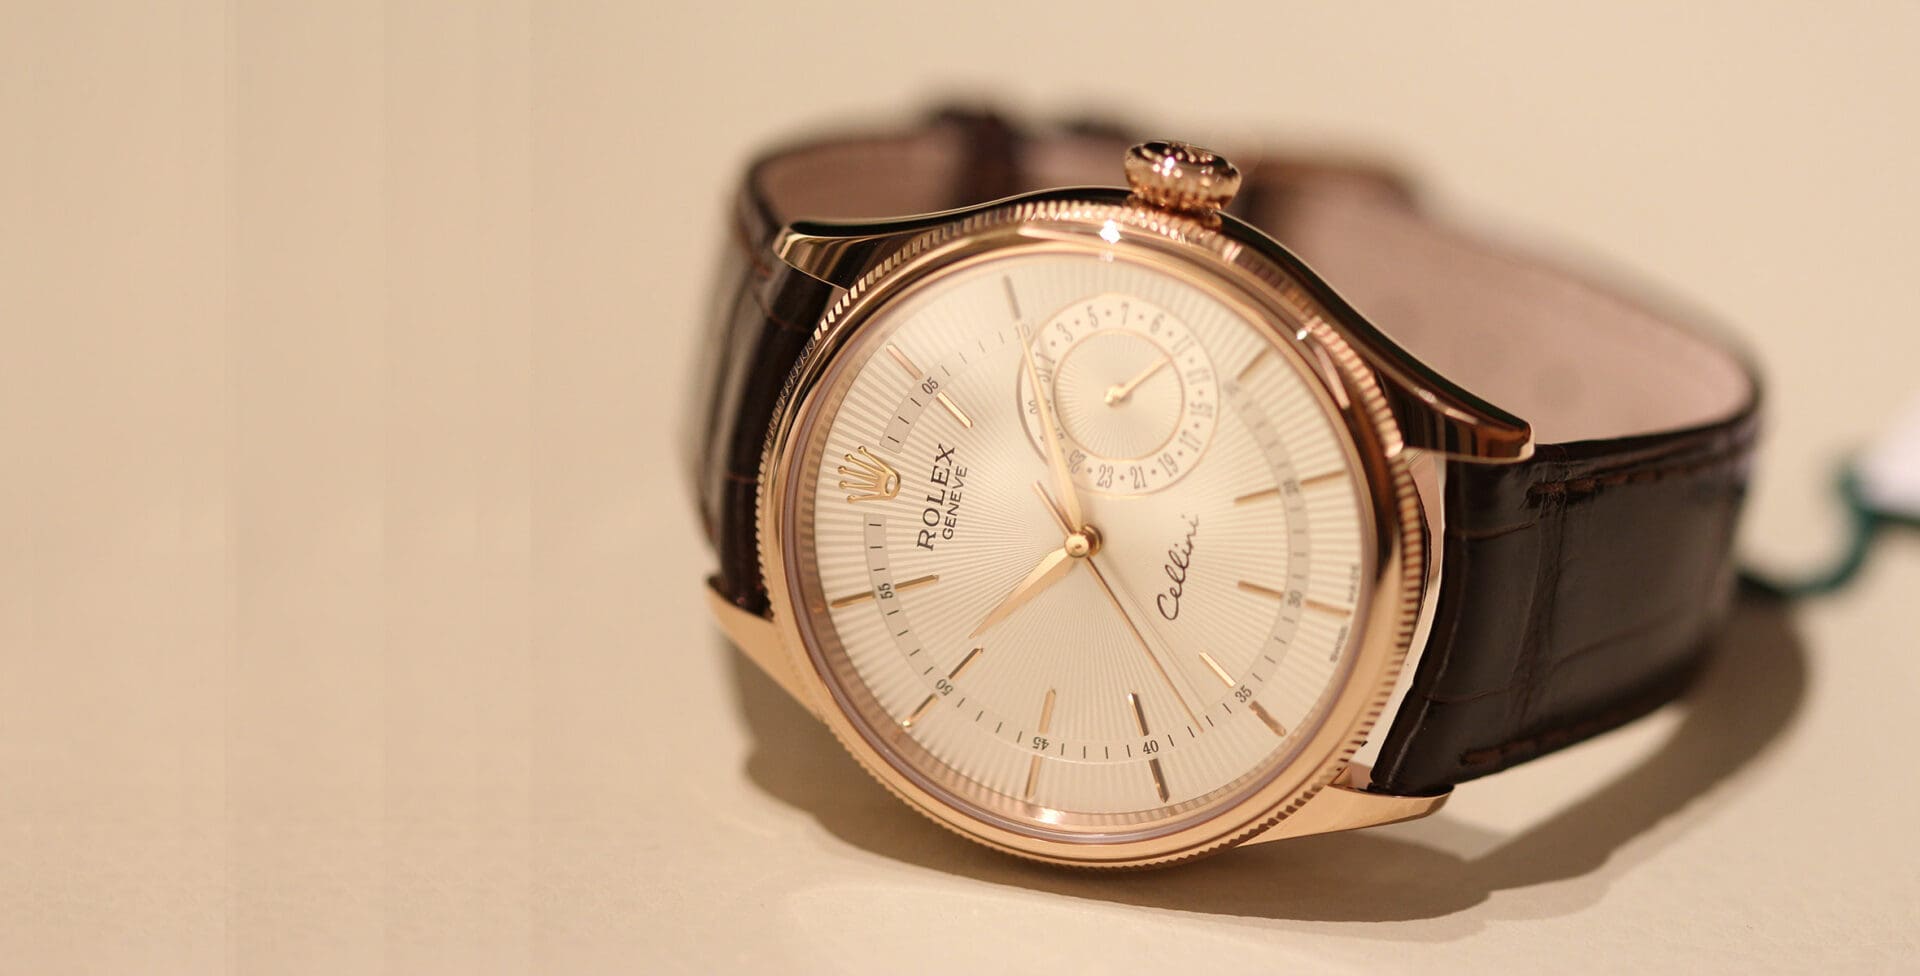 First Look: 2014 Rolex Cellini Collection